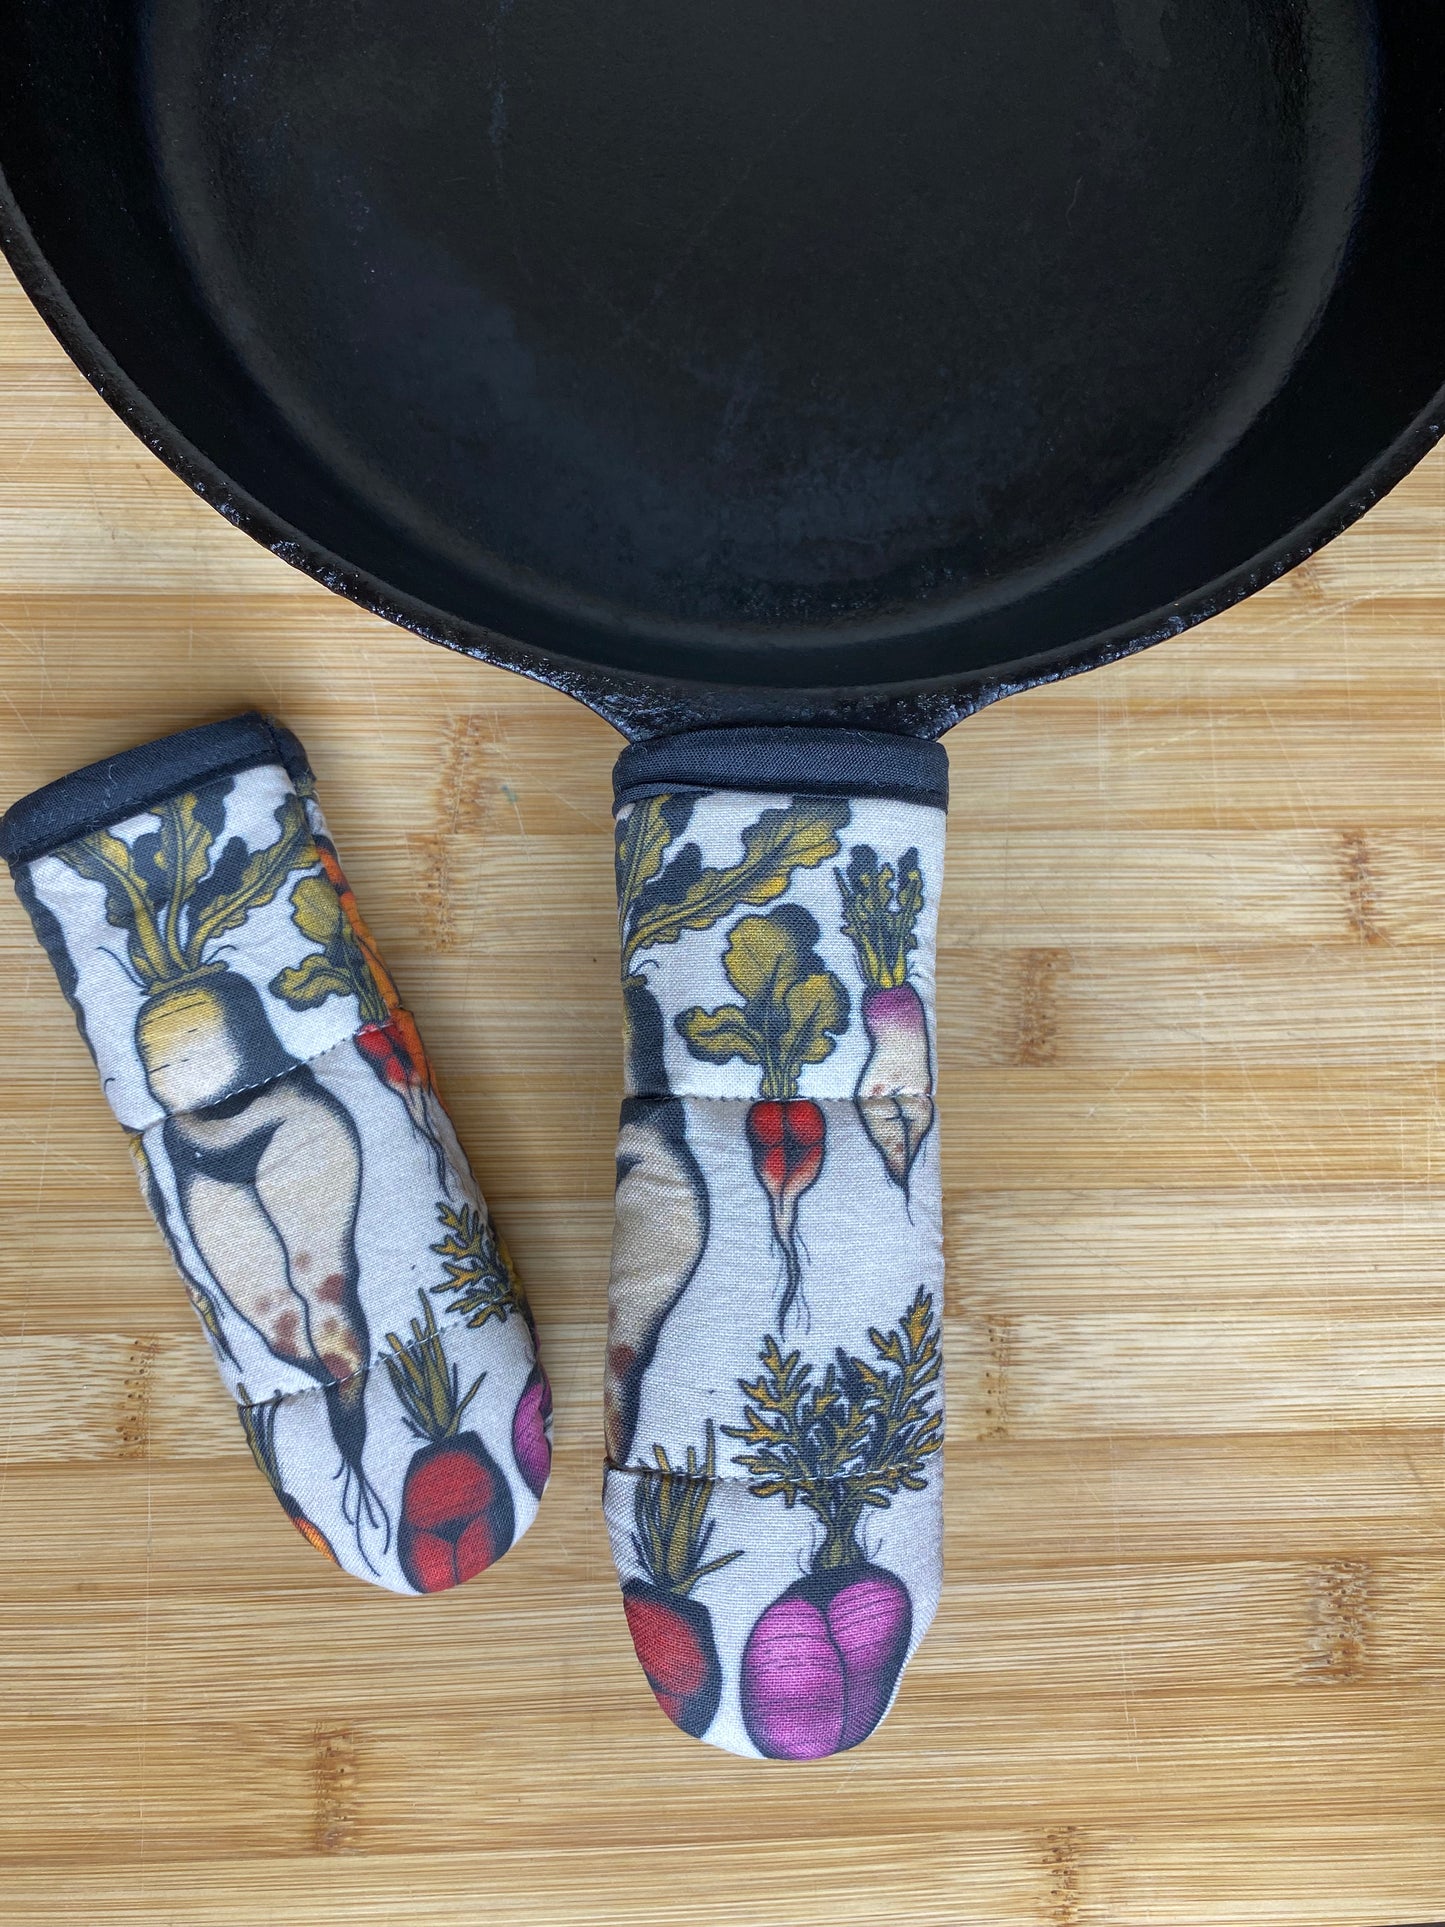 cast iron skillet handle, heat resistant, with leggy vegetable fabric